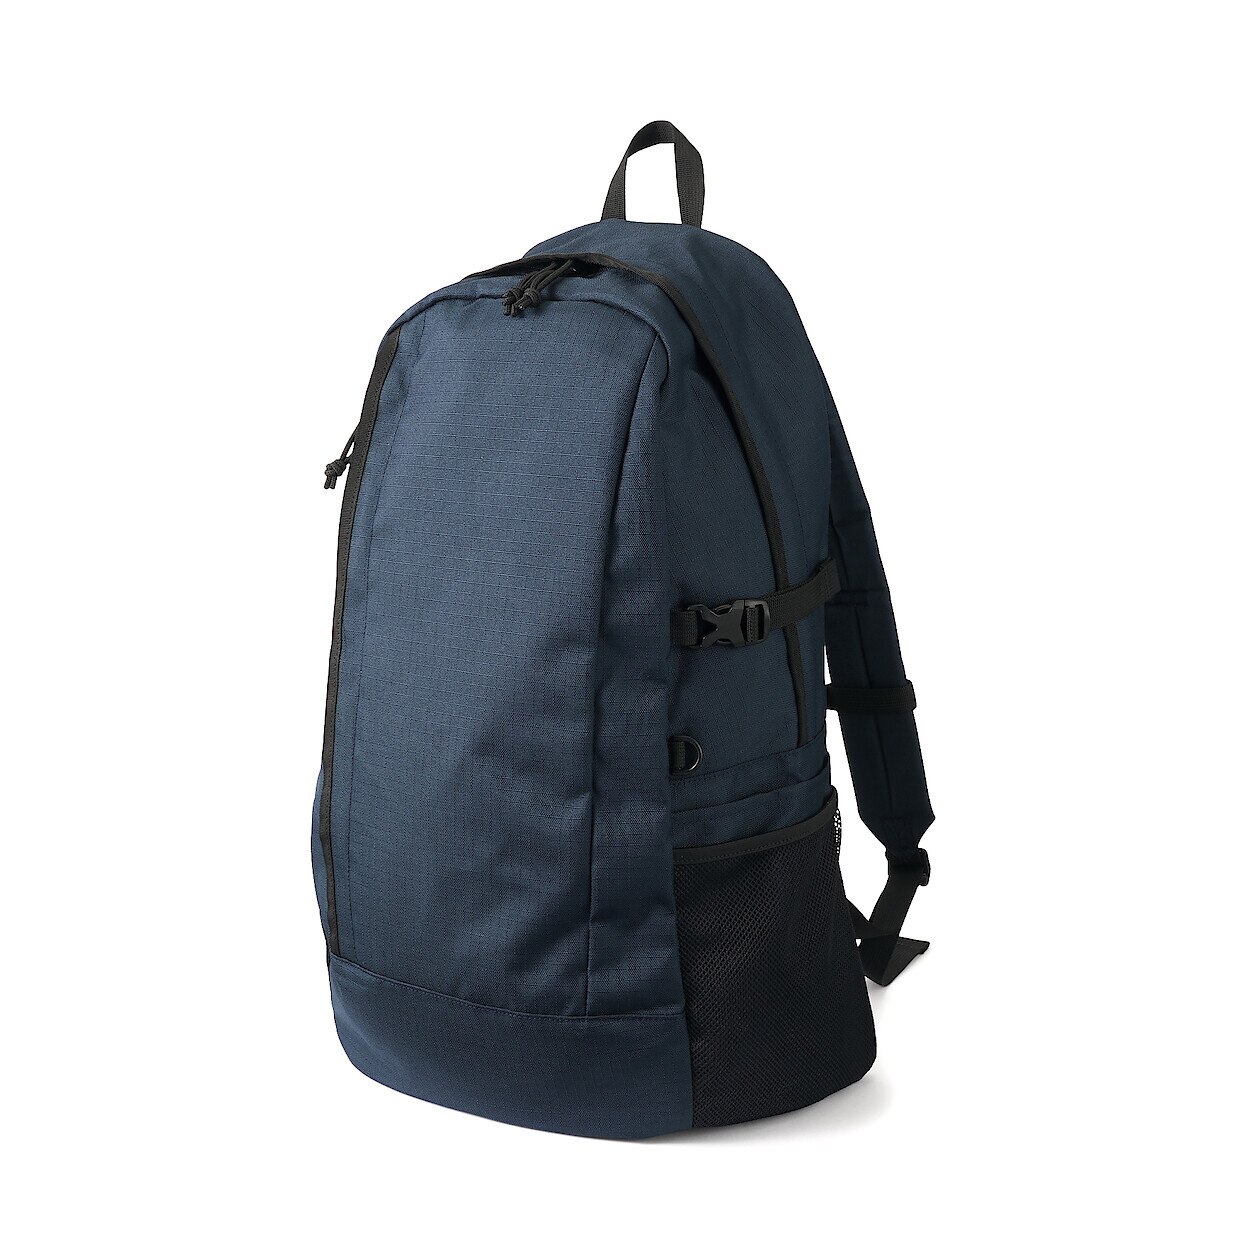 Less Tiring Water Repellent Large Capacity Backpack